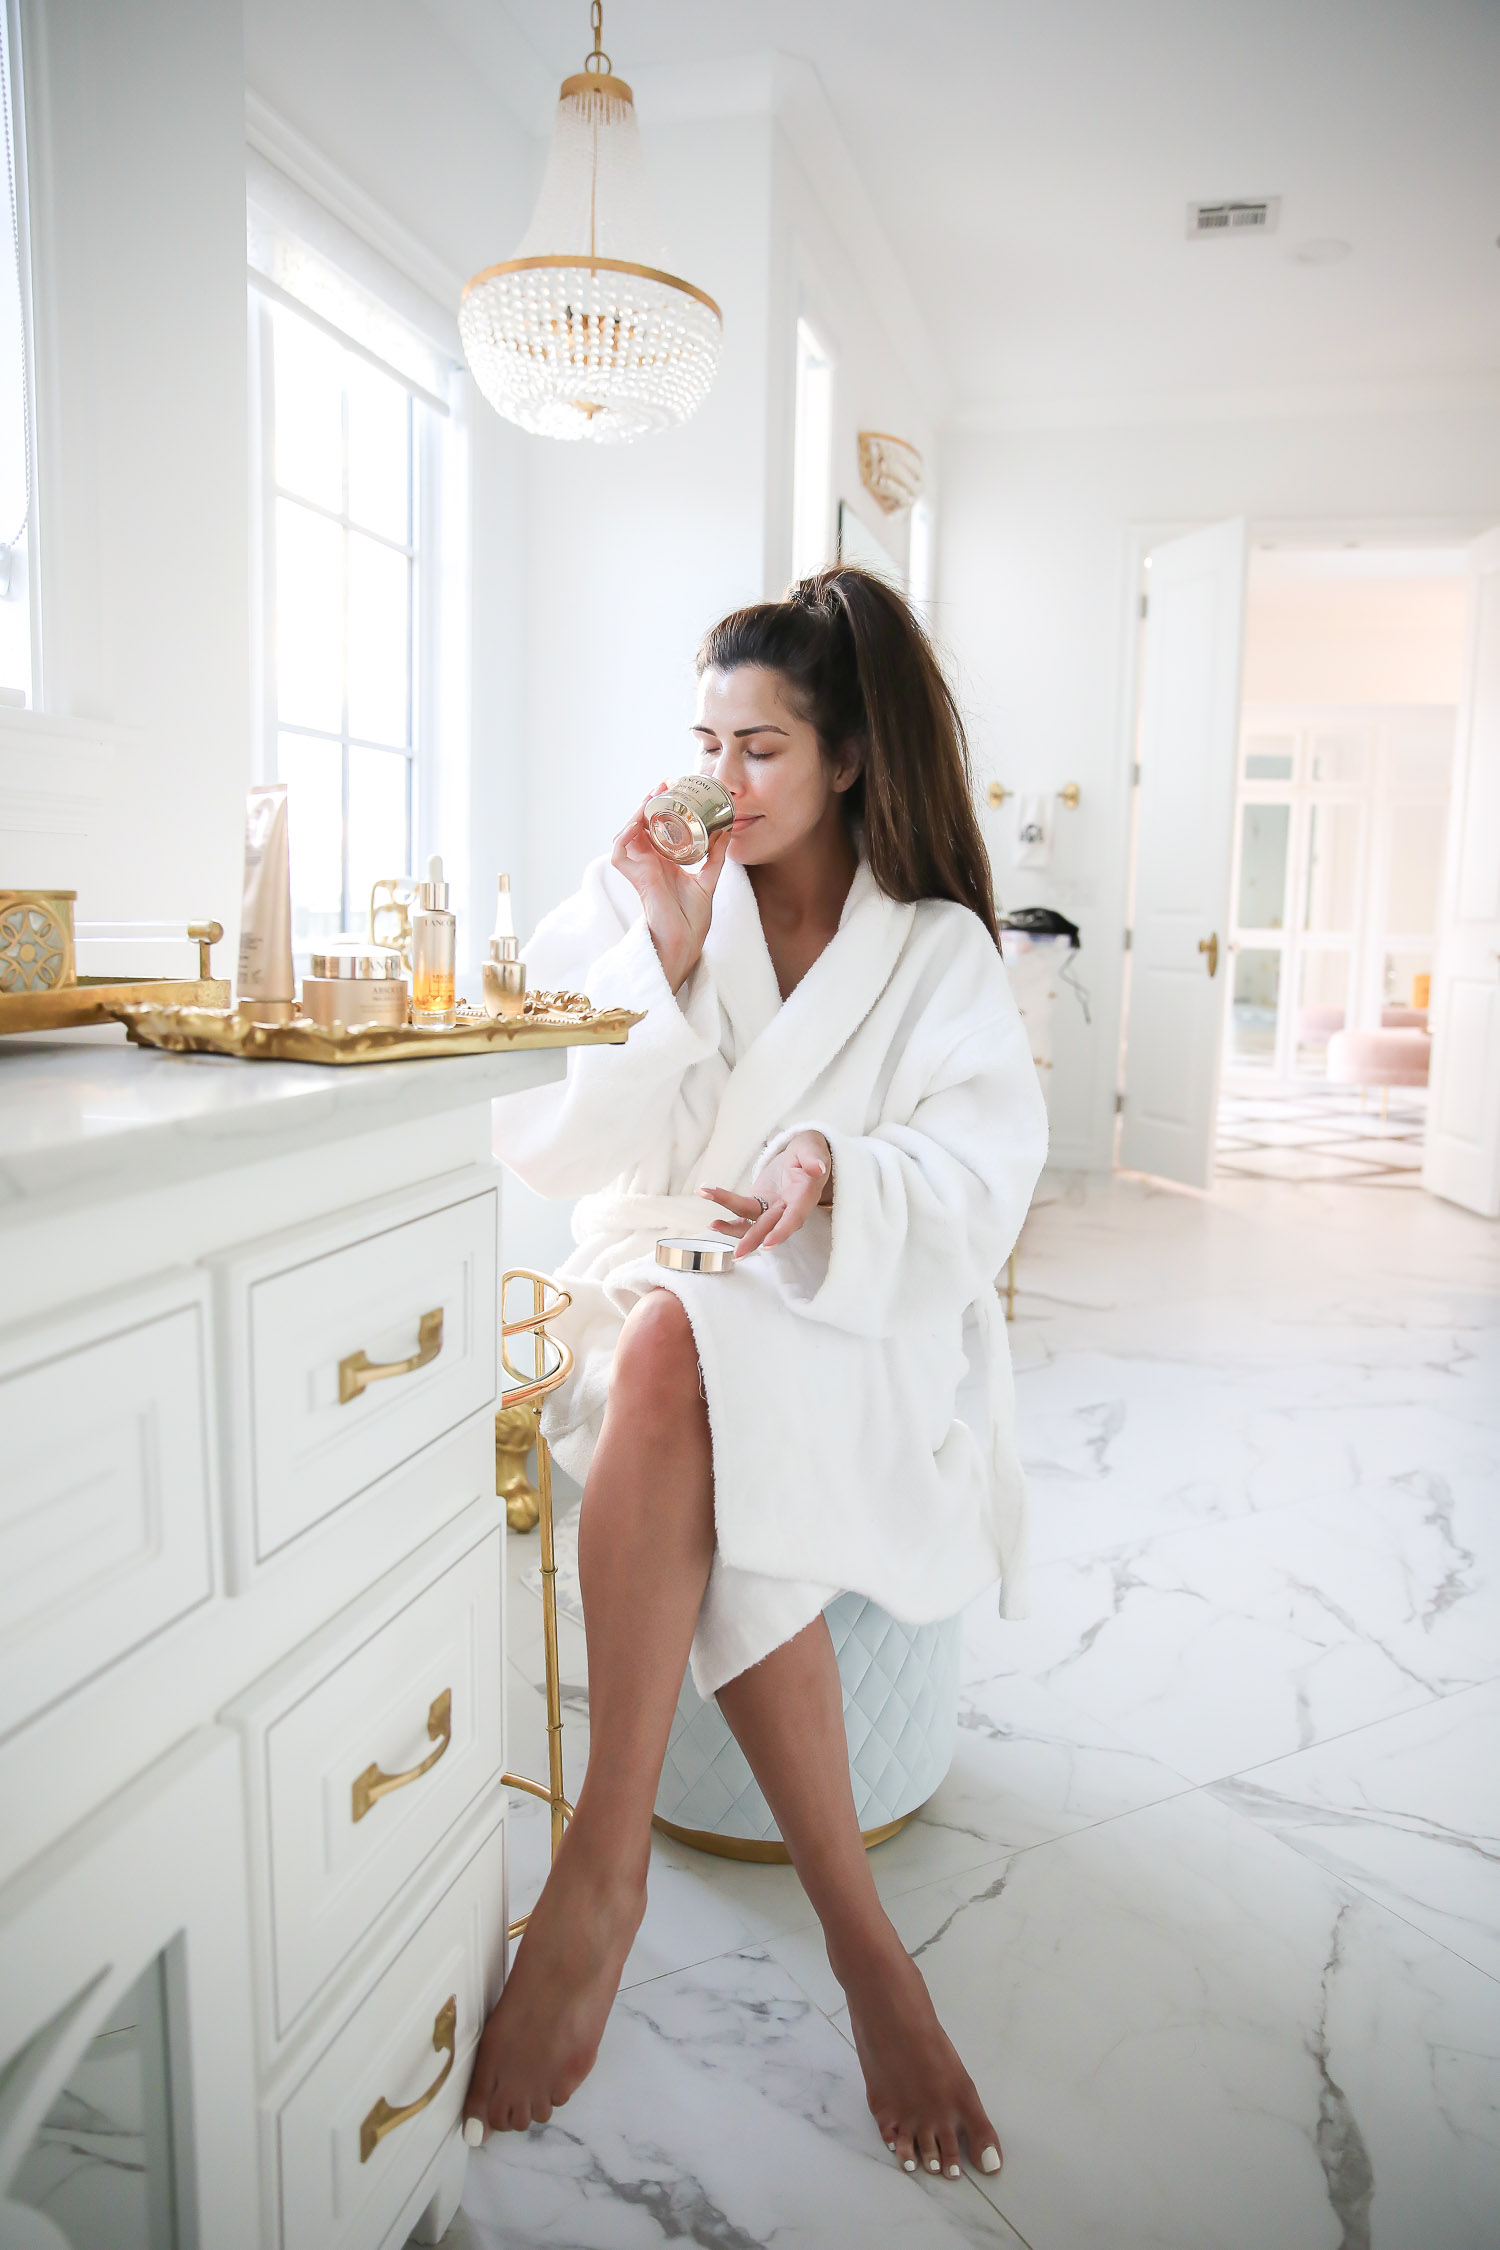 Lancome Skincare by popular US beauty blog, The Sweetest Thing: image of Emily Gemma holding a Lancome Absolue skincare product. 